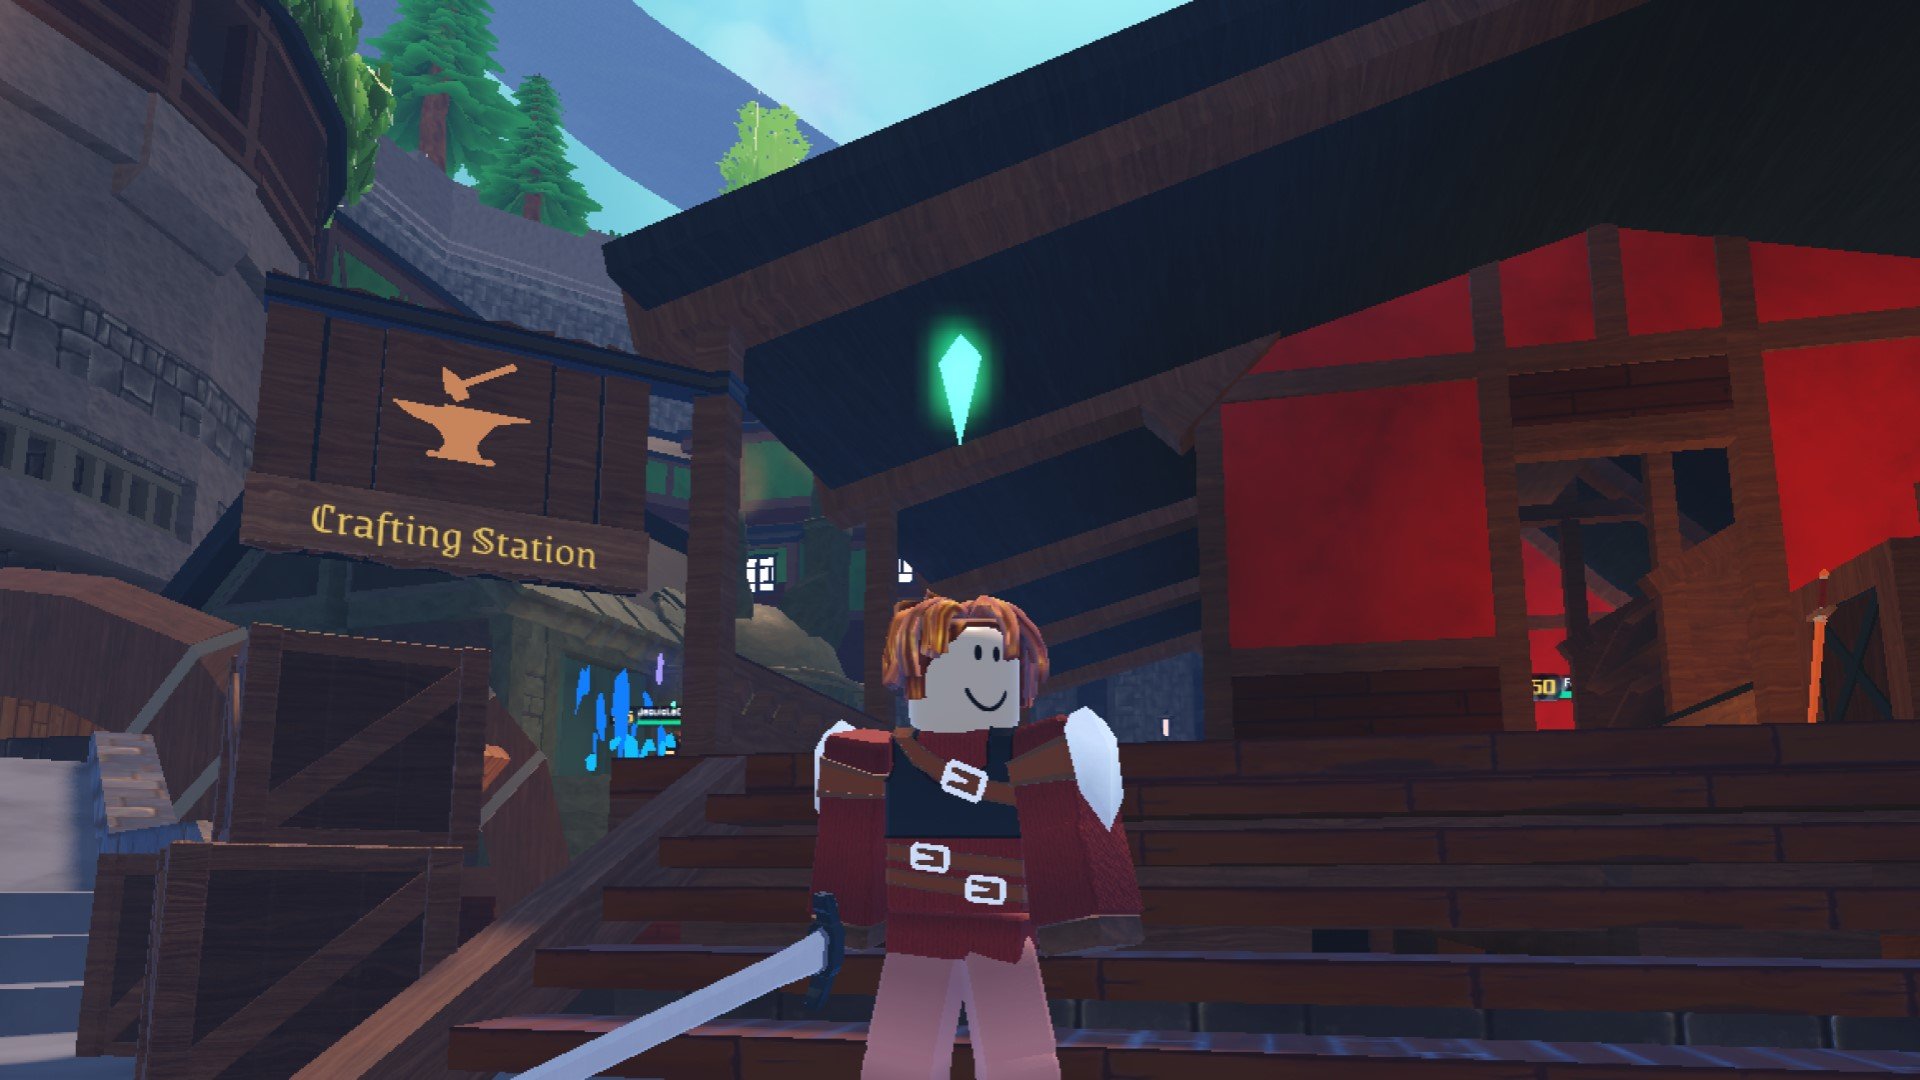 A character from Roblox game Swordburst 3 standing in front of a Crafting Station.